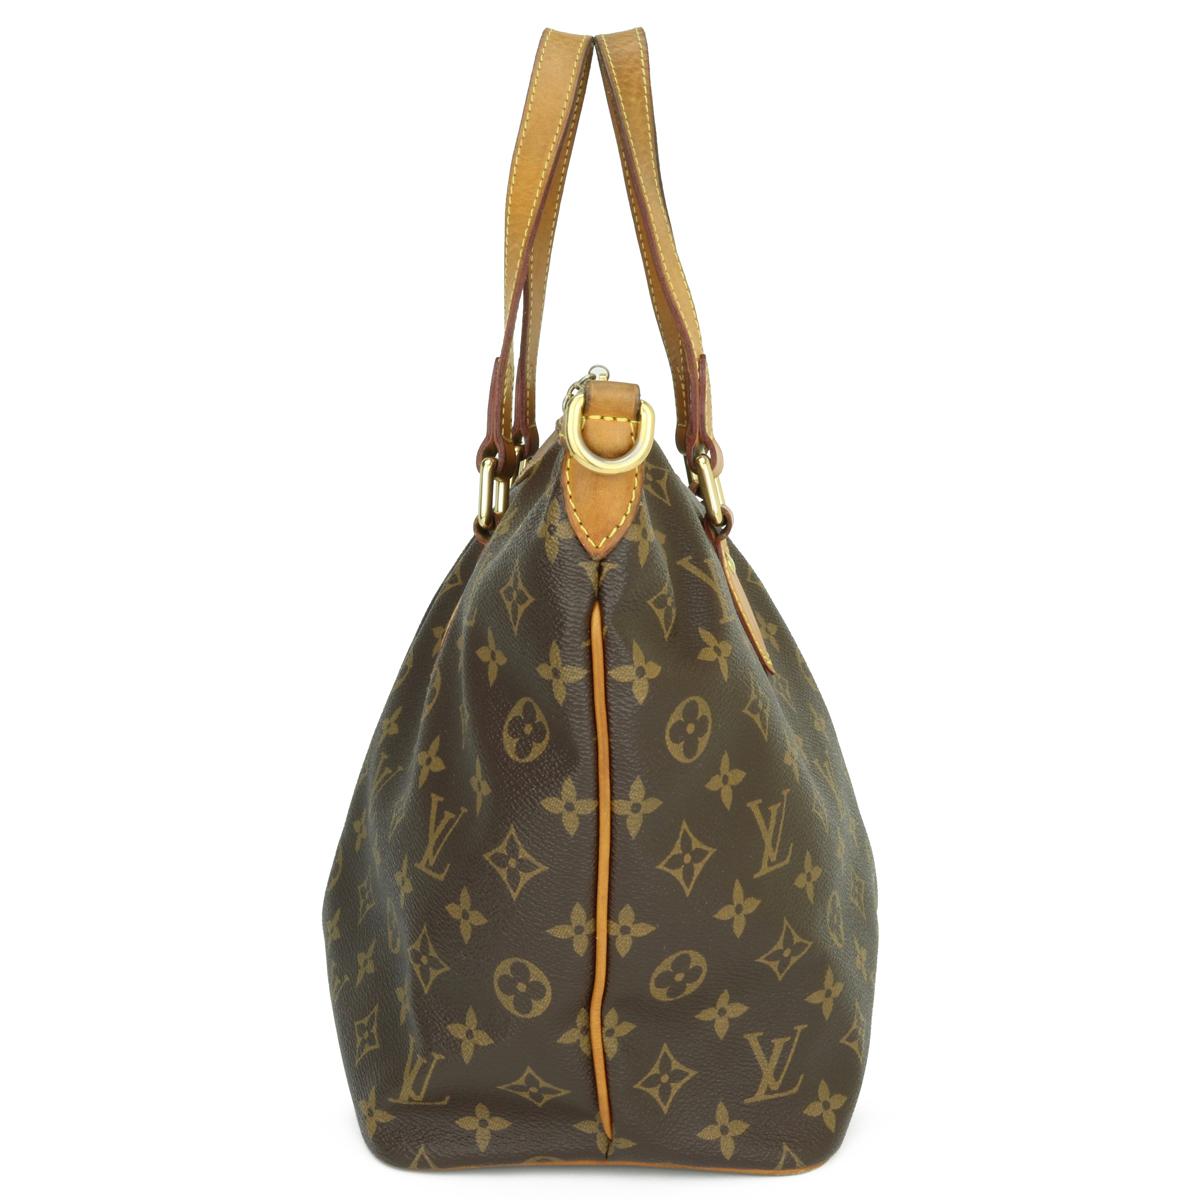 Louis Vuitton Palermo PM Bag in Monogram 2011 In Good Condition For Sale In Huddersfield, GB